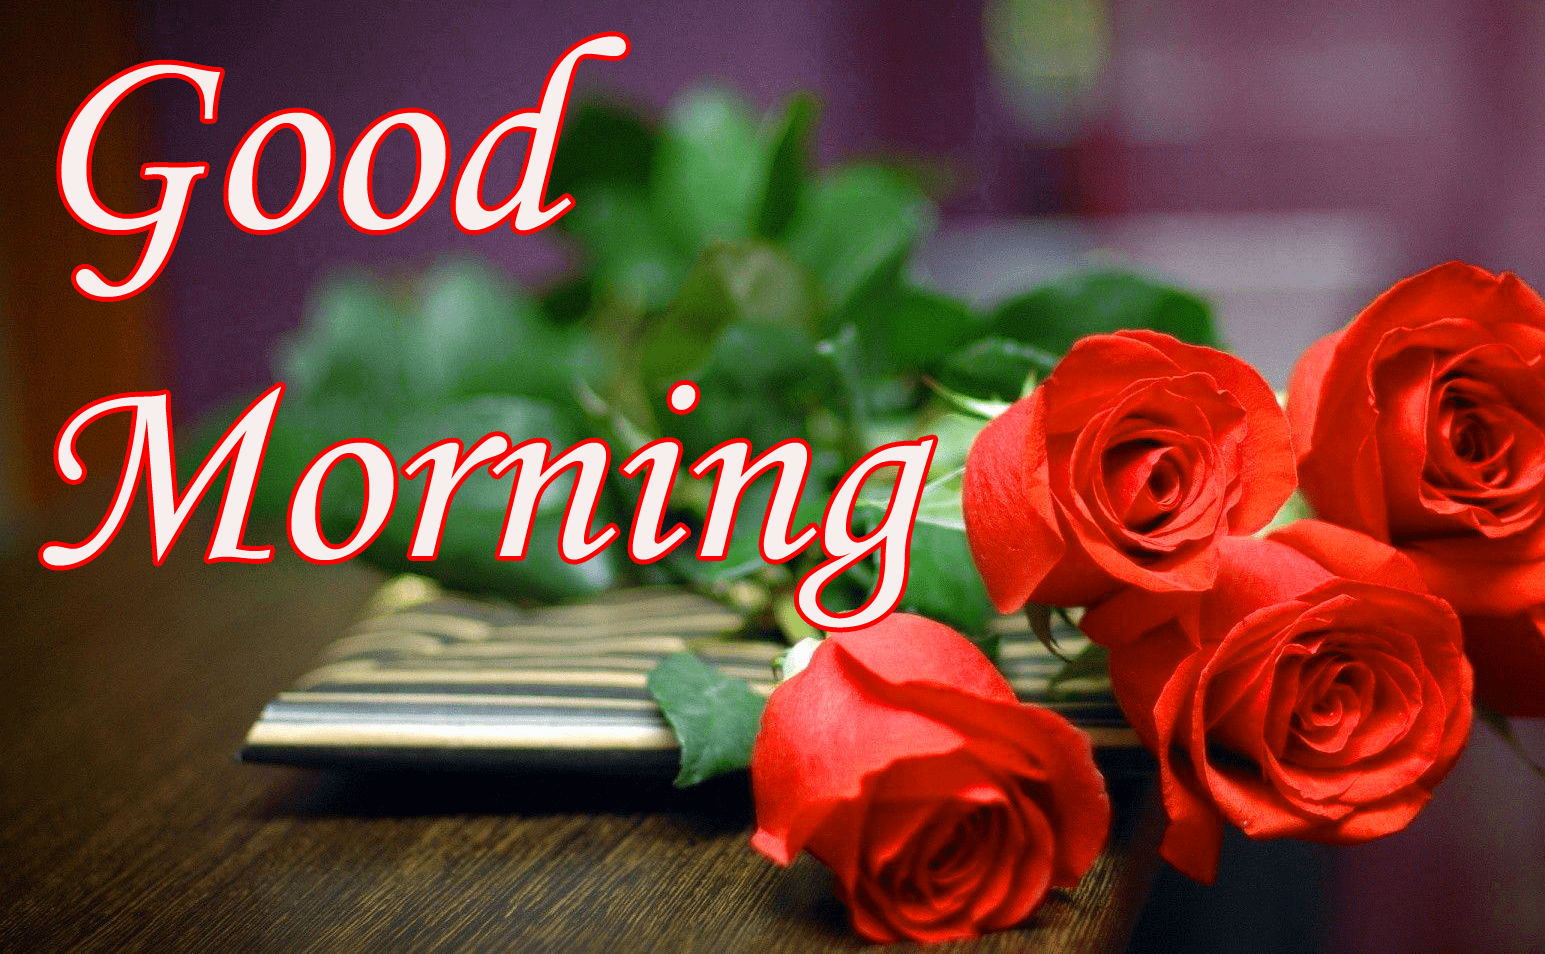 Red Rose Good Morning Images Pics Download 